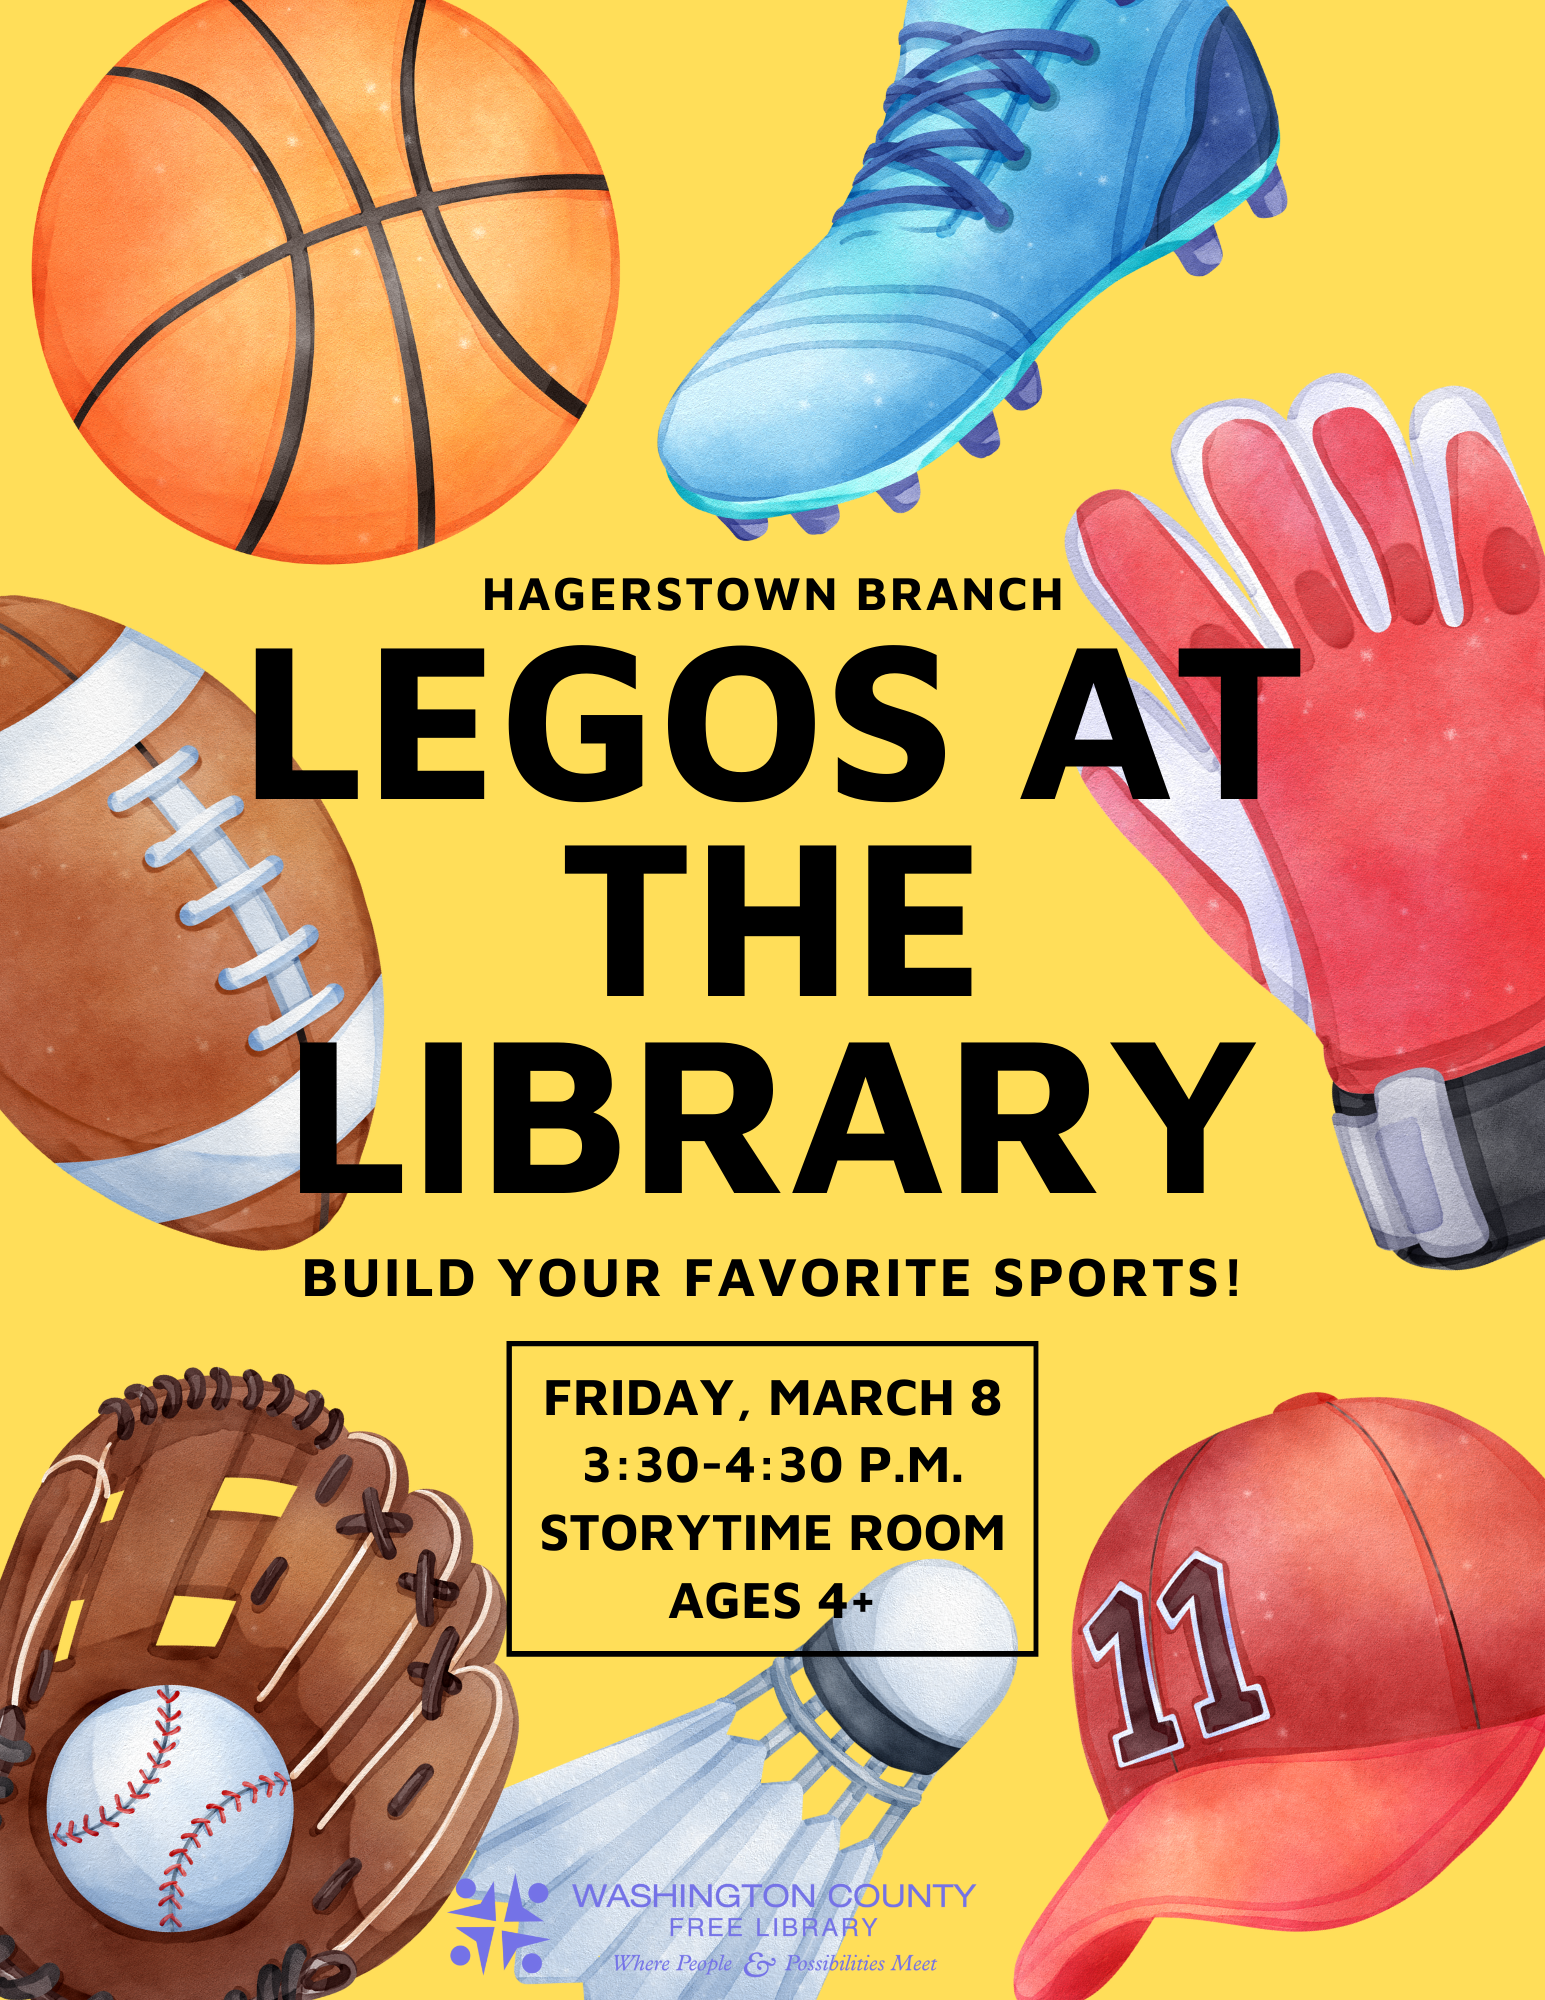 Hagerstown Branch Legos at the Library. Come build your favorite sports. Friday, March 8, 3:30 to 4:30, Storytime Room, Ages 4 and up. 